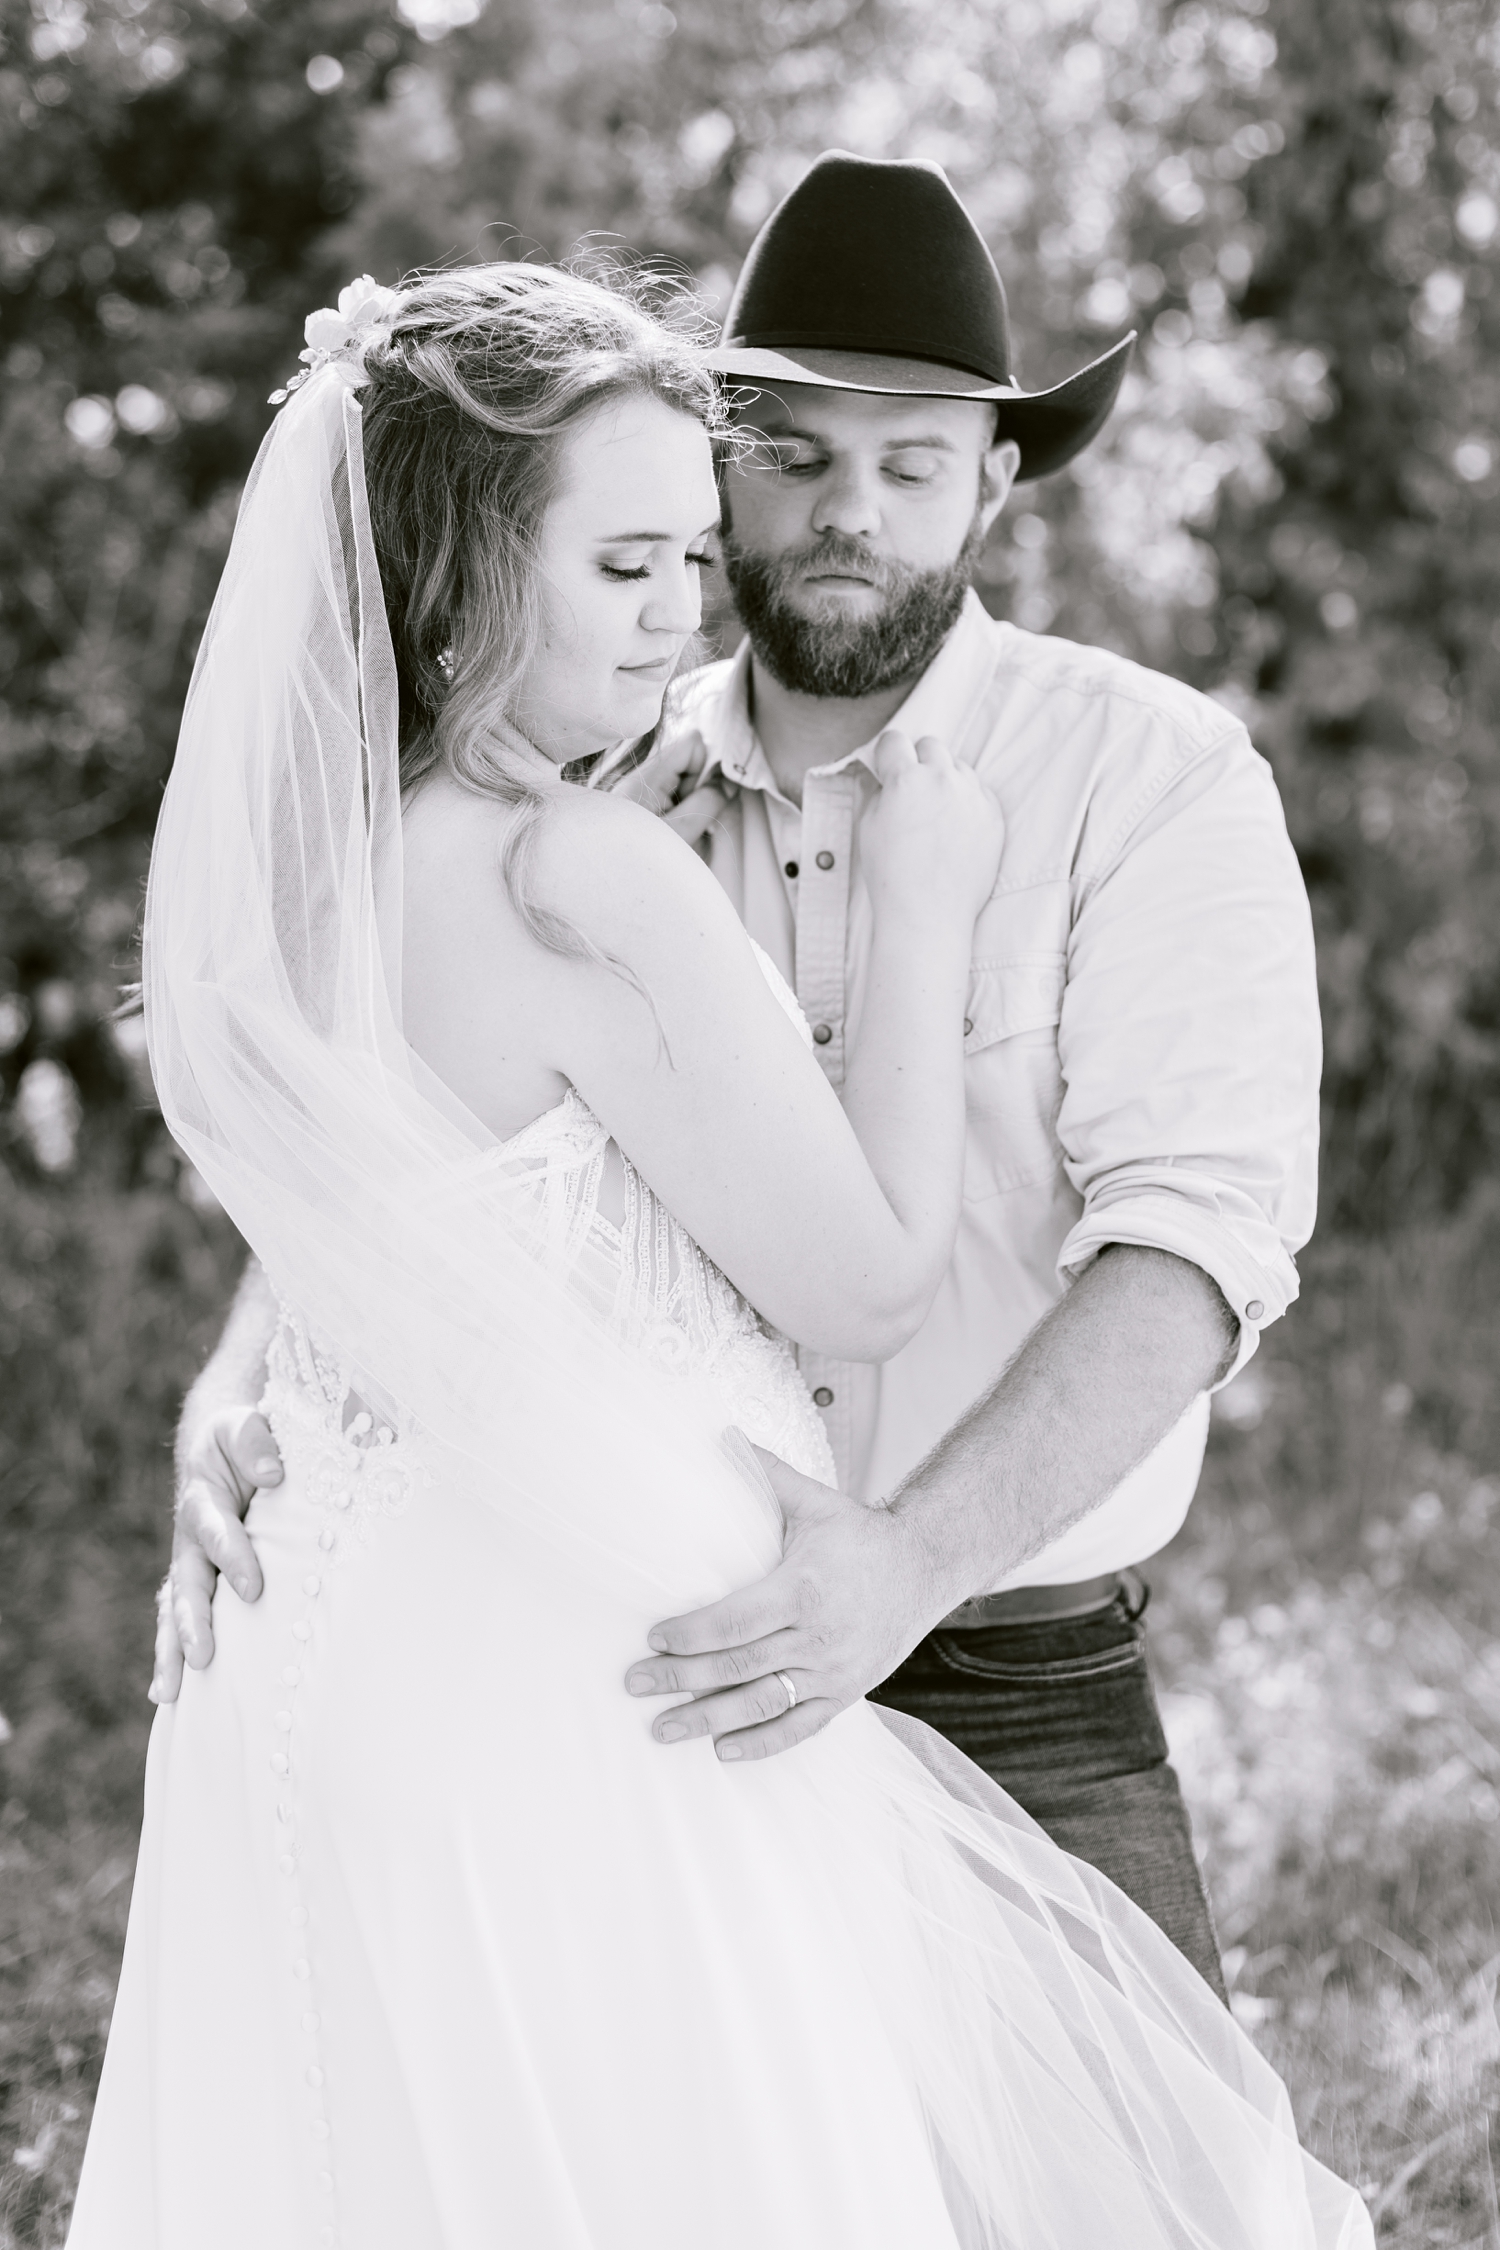 Matt holds his bride, Megan, close as they look down | A rustic, country wedding with western touches | CB Studio